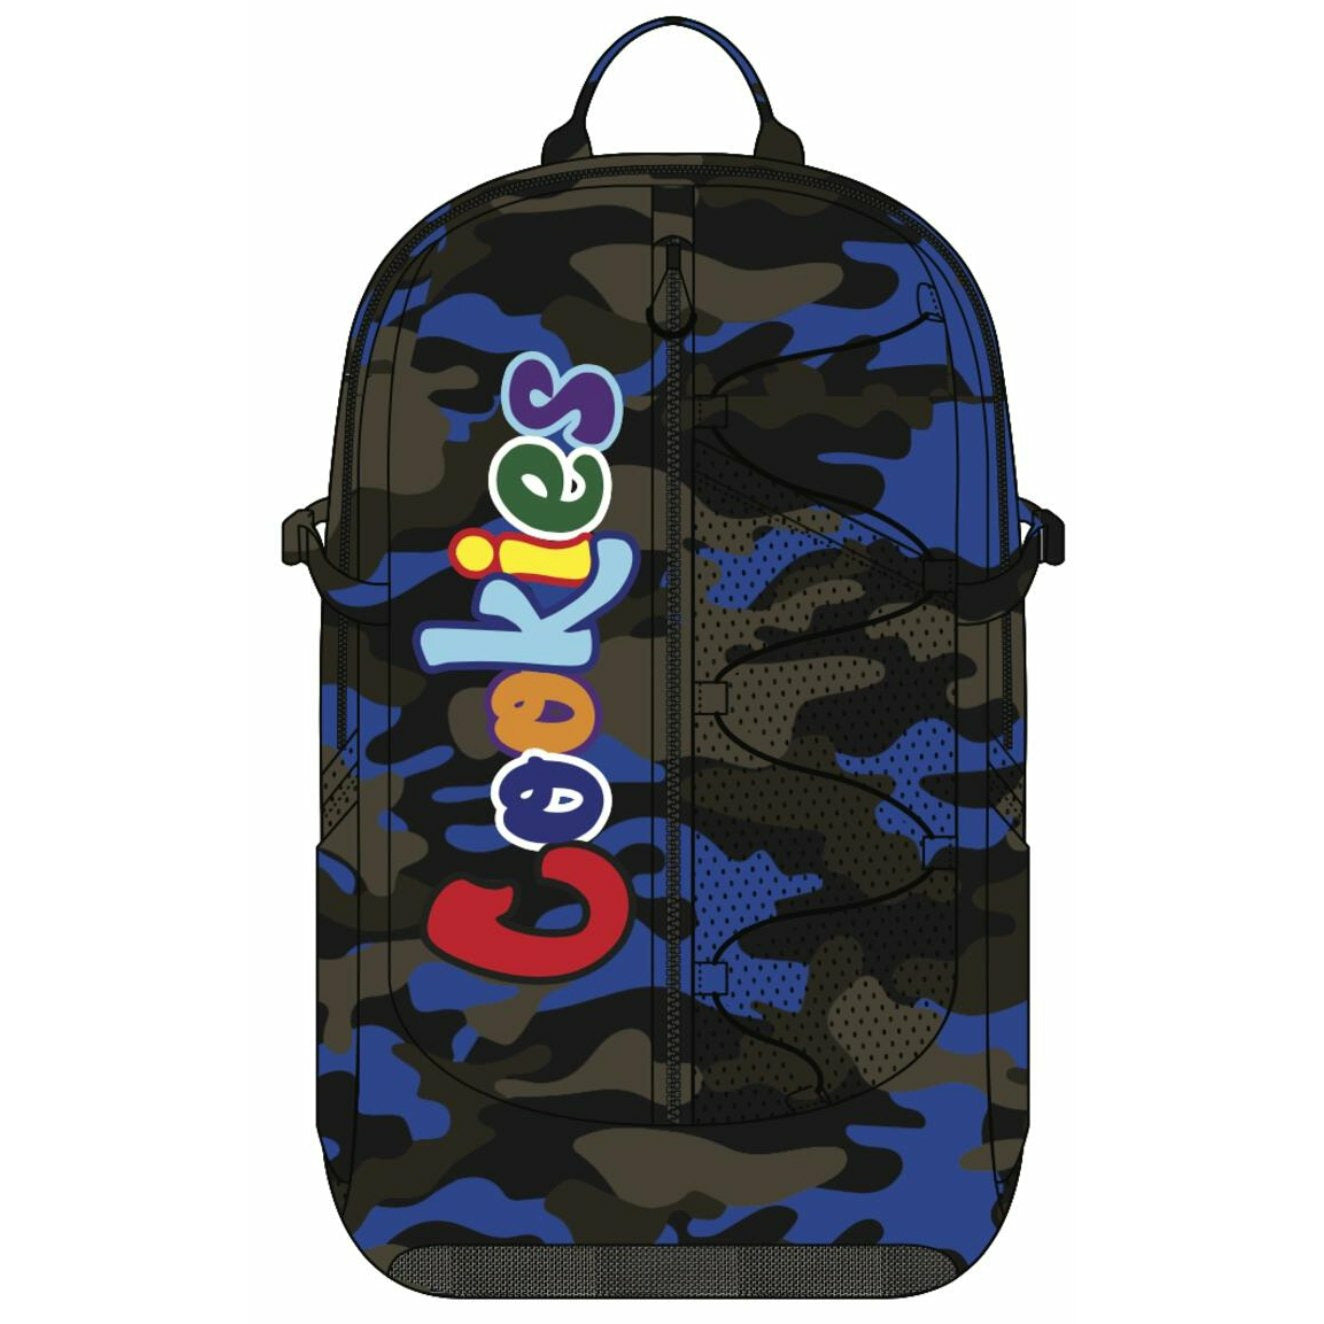 COOKIES SMELL PROOF "THE BUNGEE" NYLON BACKPACK NAVY - Dousedshop